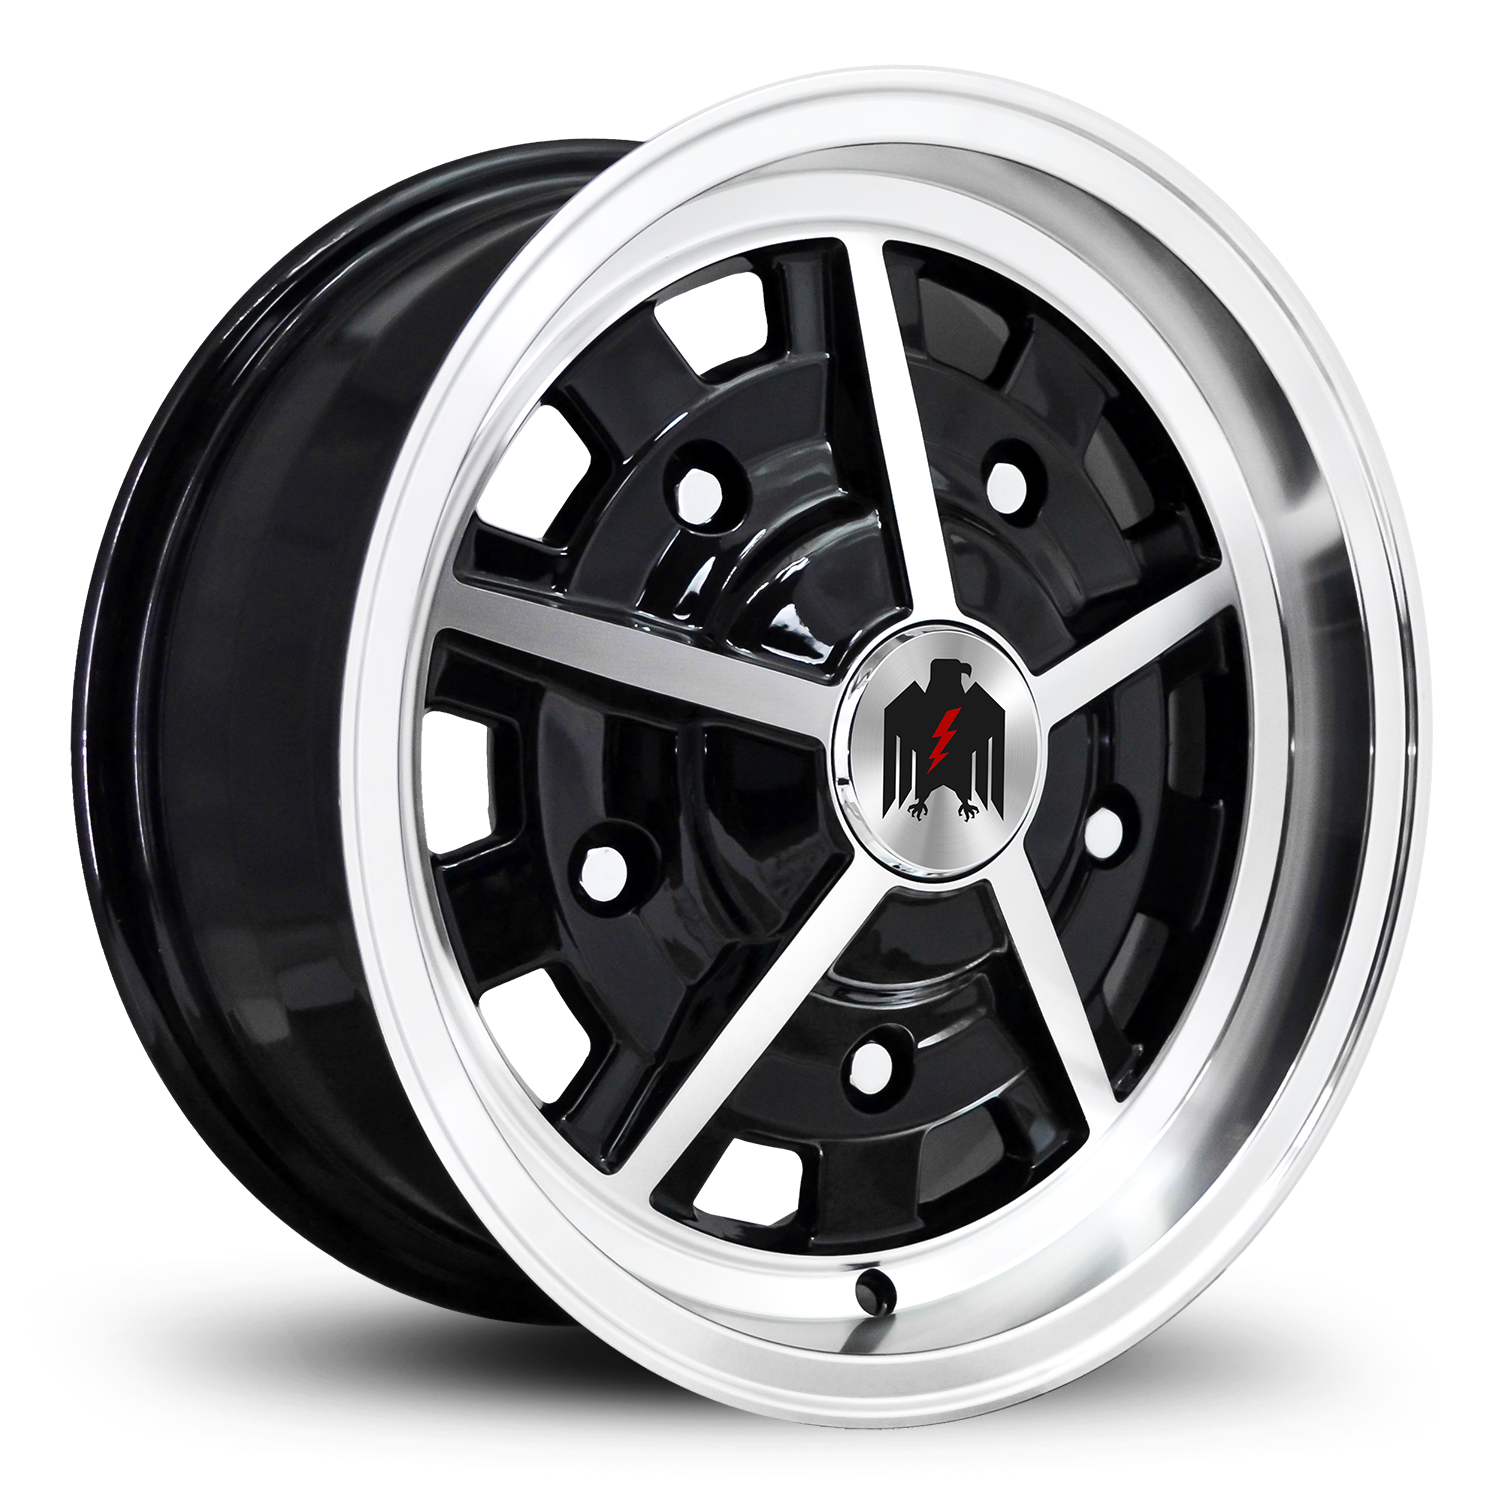 Shop the Klassik Rader Rally South African Rostyle Sprint Star Magnum 500 Replica style Wheels